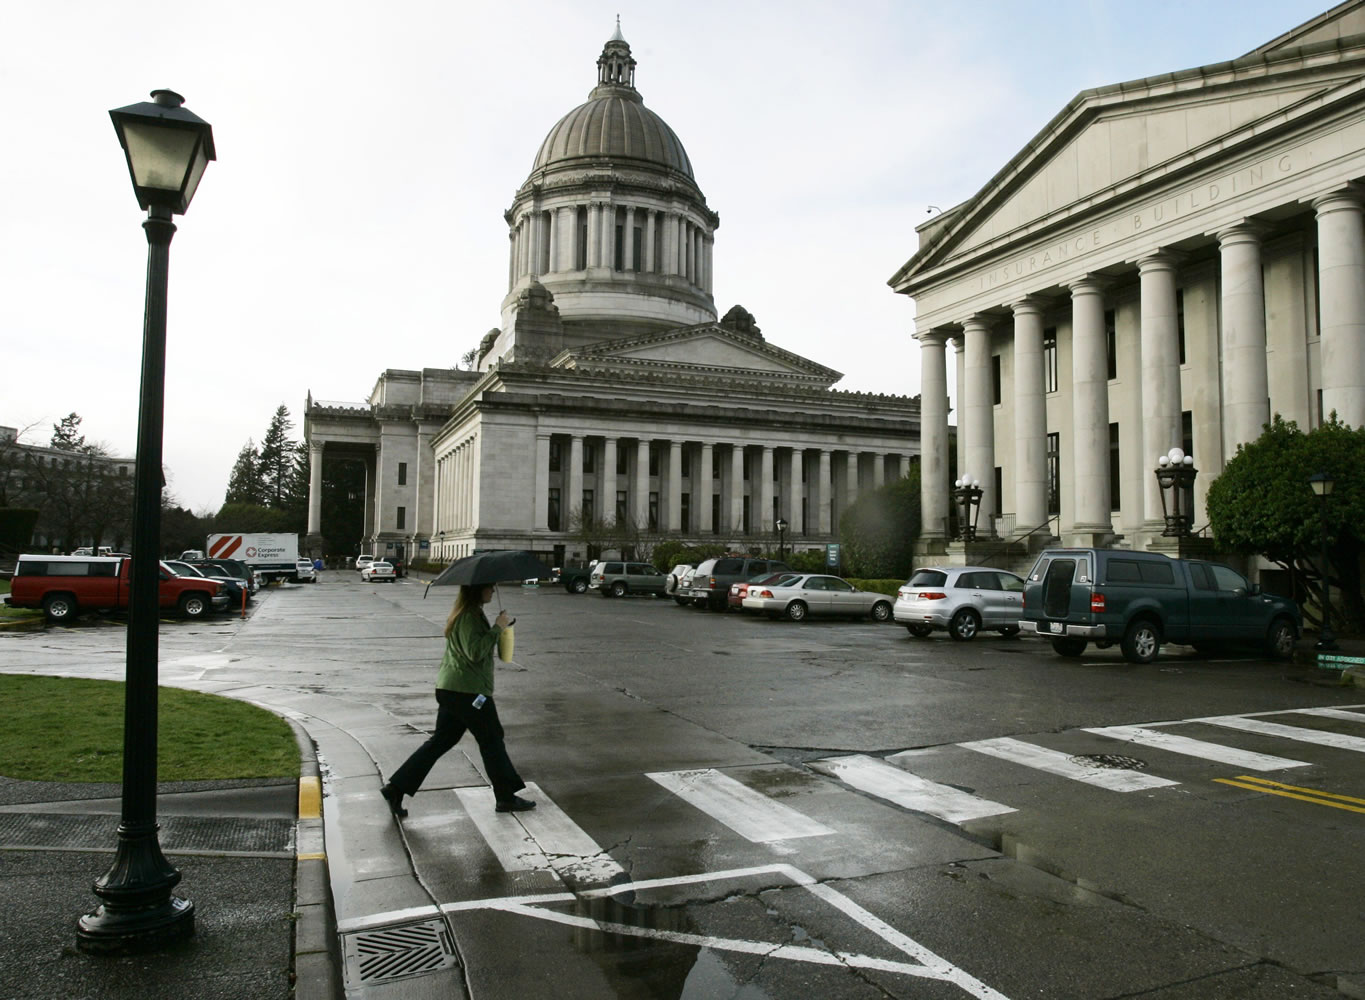 A pedestrian uses an umbrella as she crosses the street at the Capitol in Olympia.